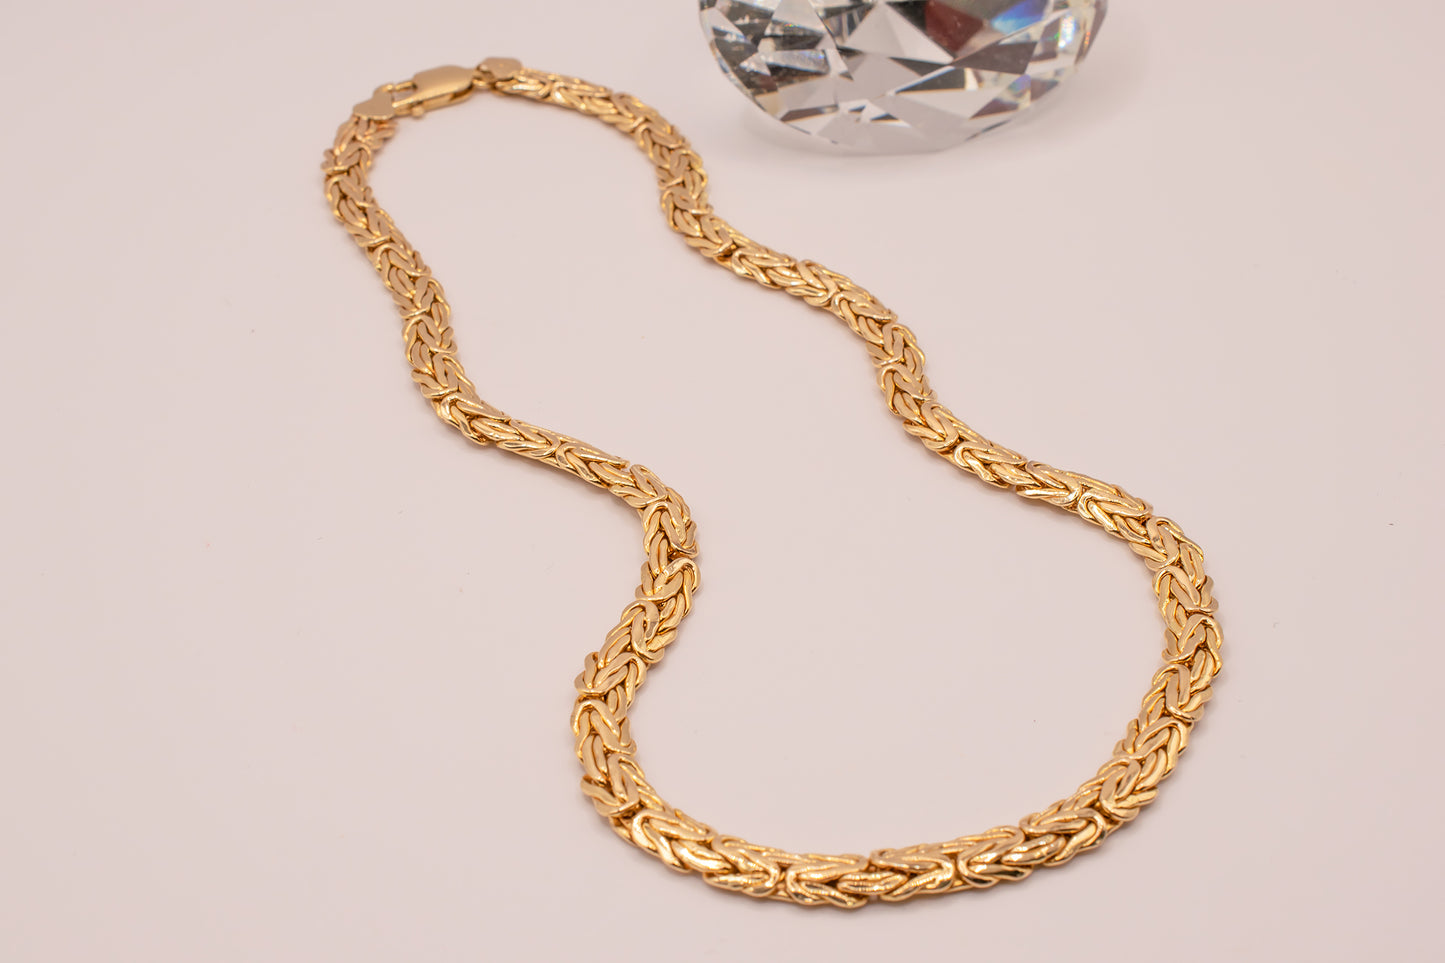 Vintage 14k Yellow Gold Italian Byzantine Style Chain Necklace 16 Inches 6mm.